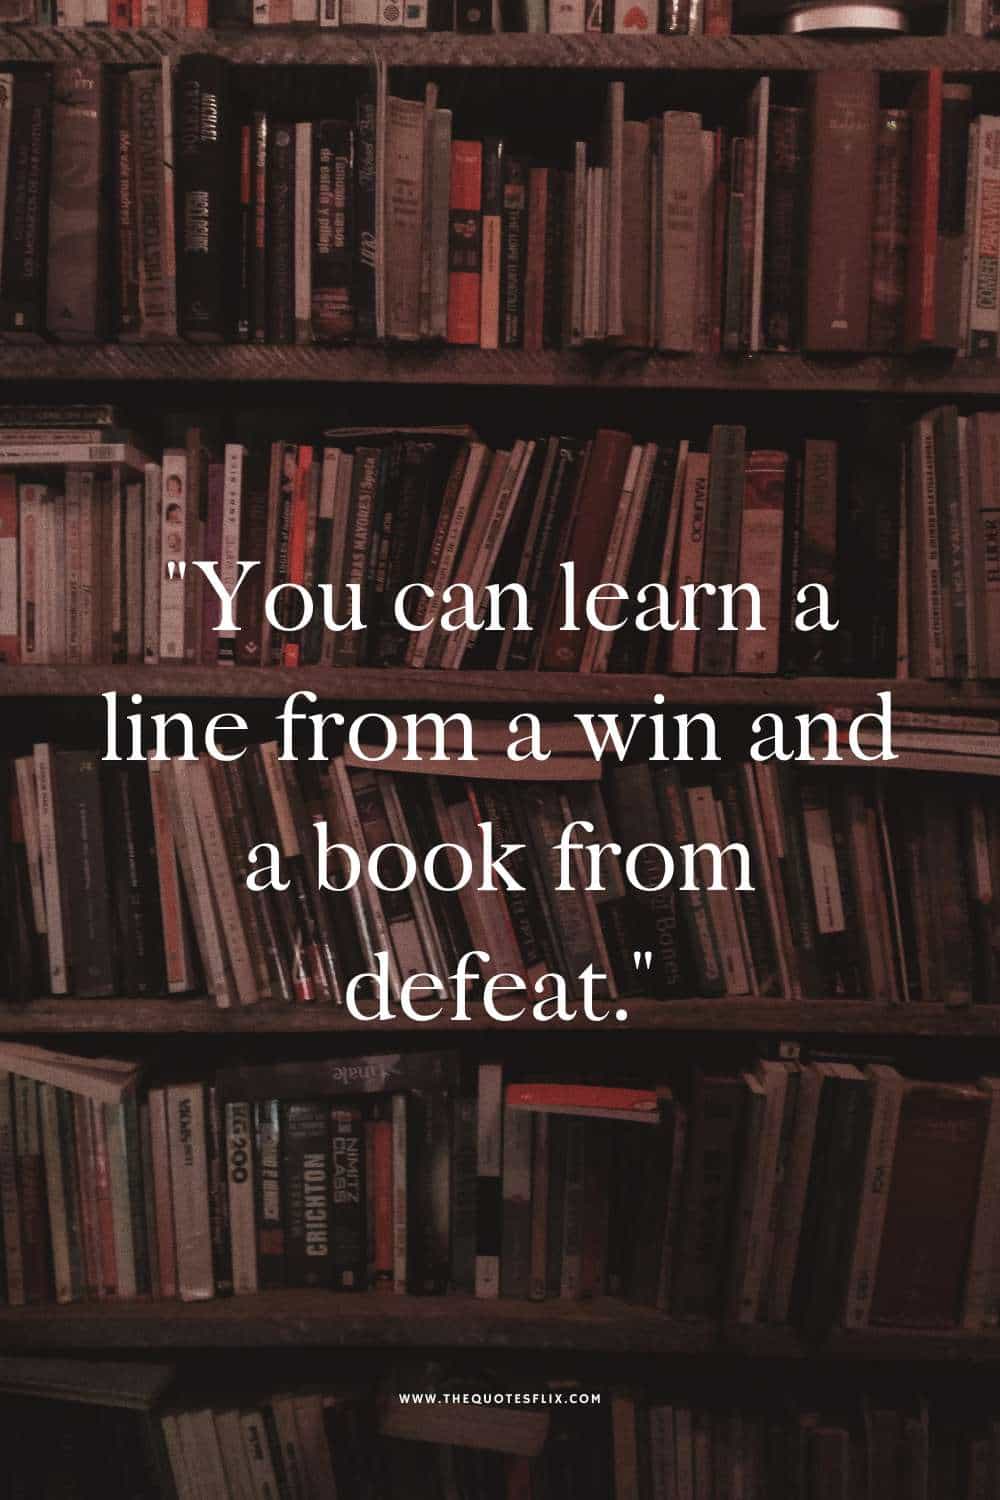 Quotes On Football Love - you learn a line from win and book from defeat